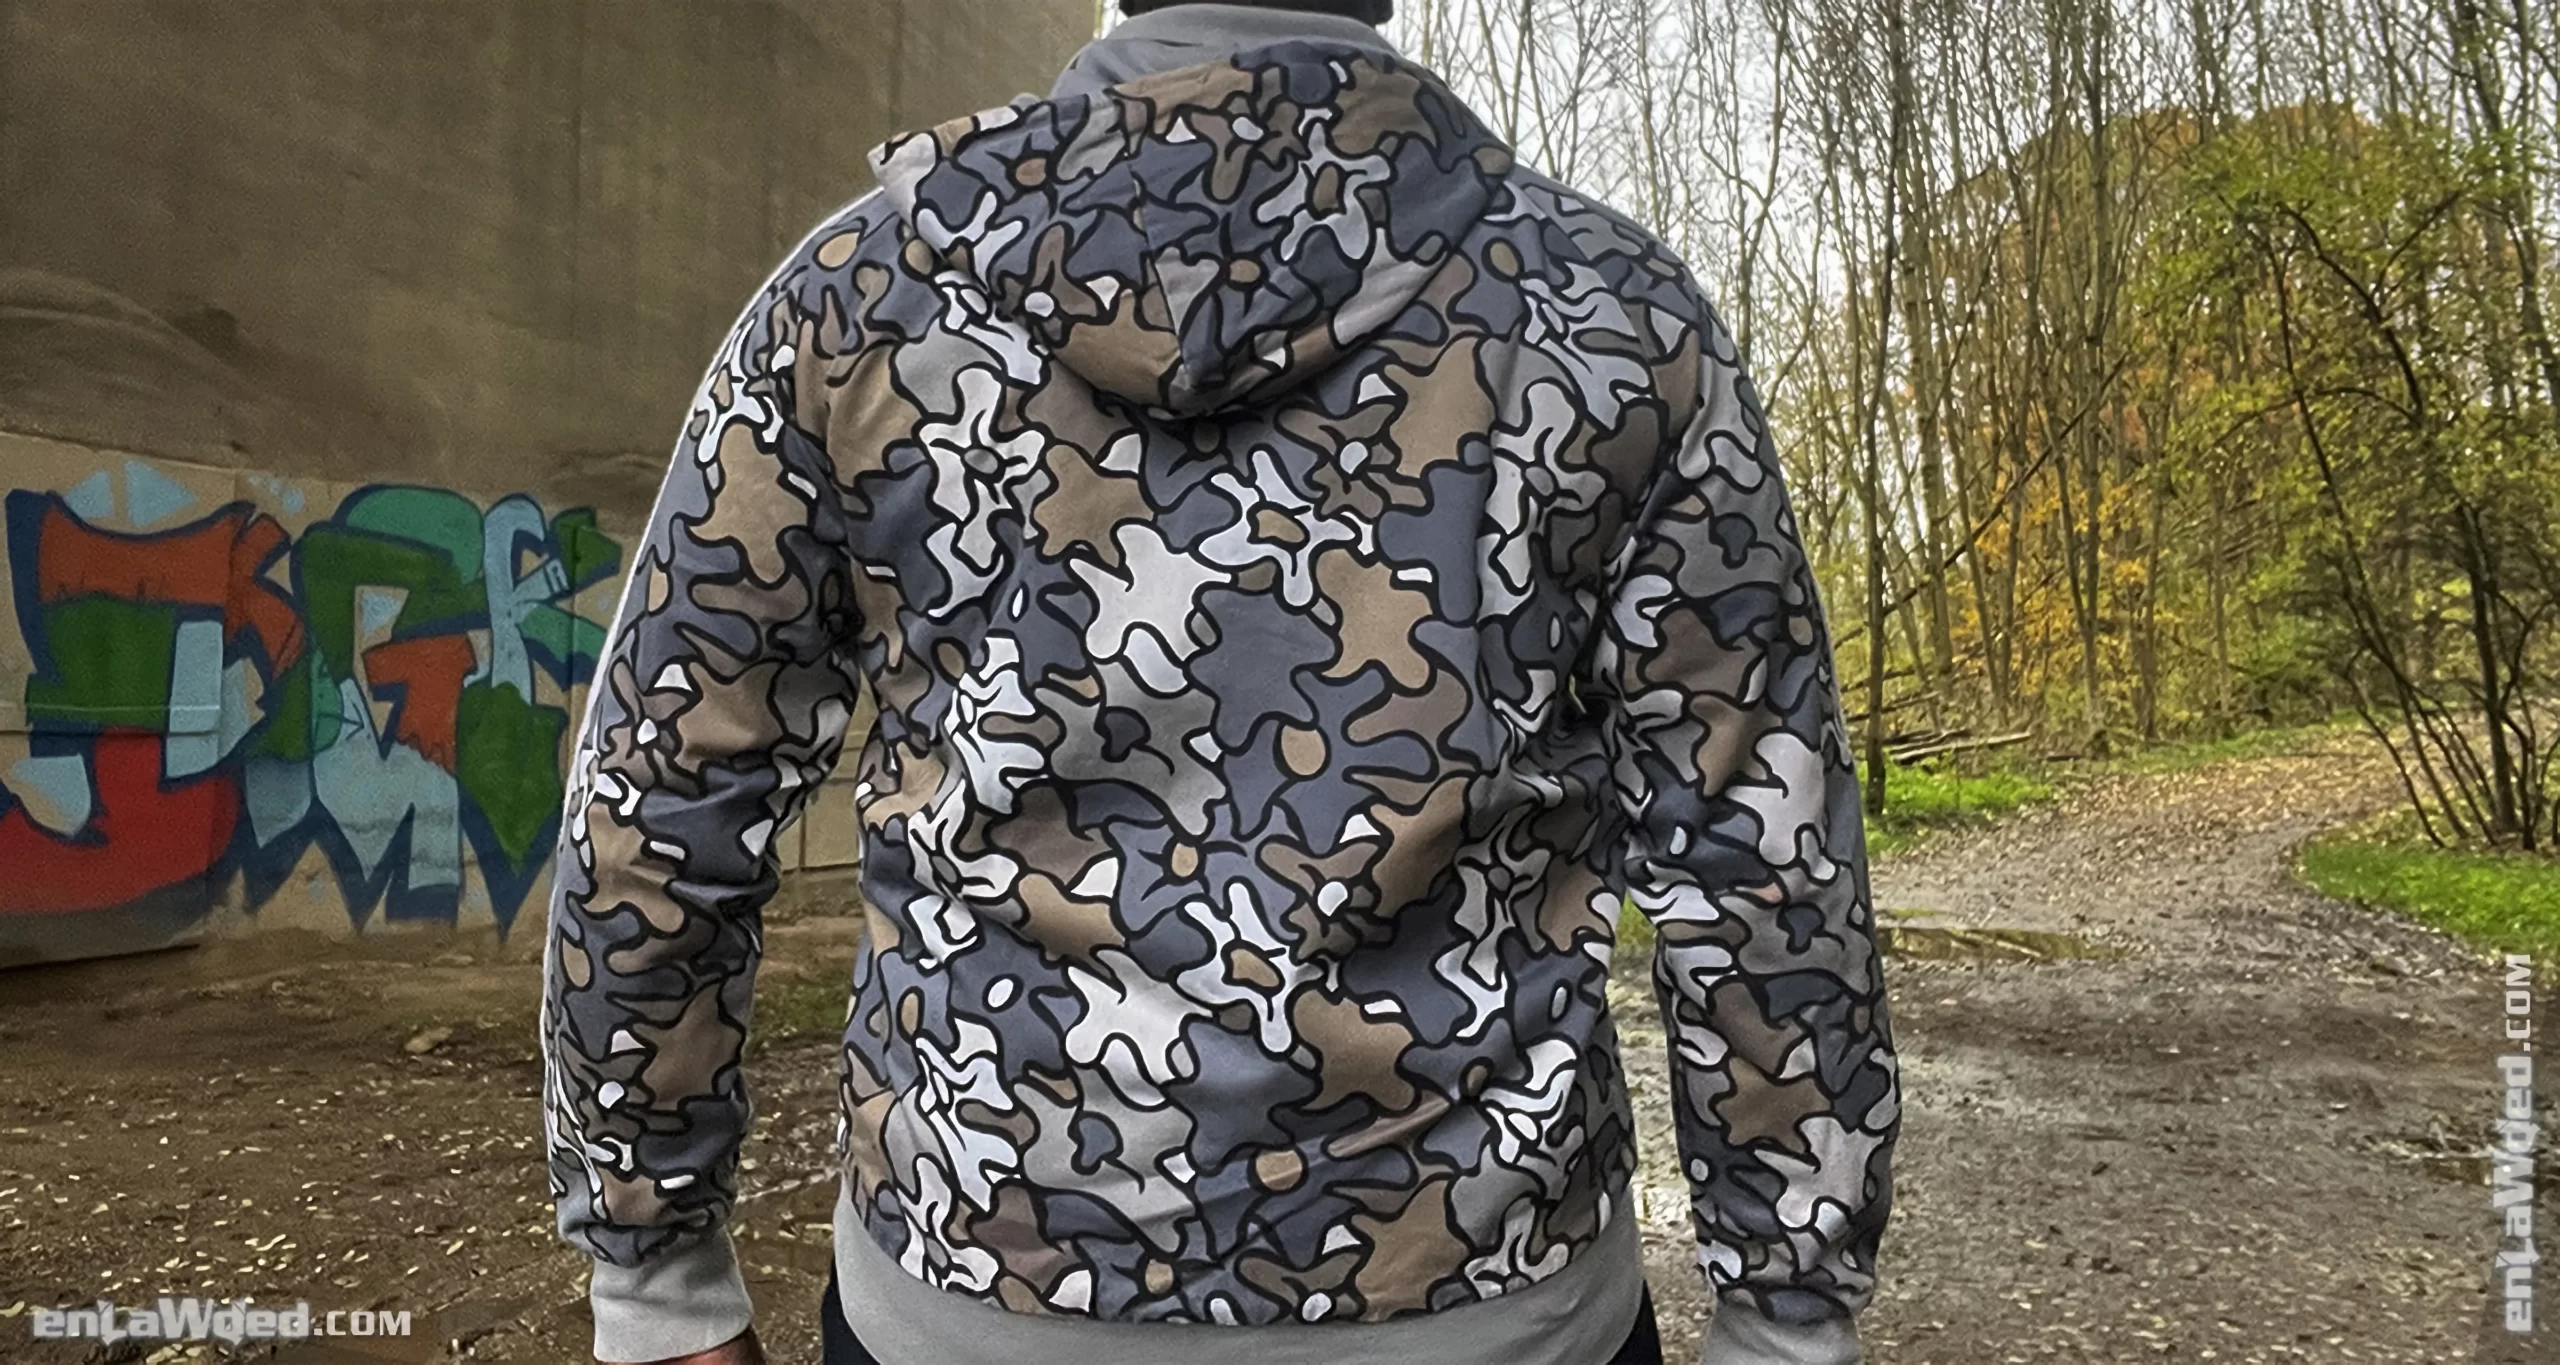 Men’s 2008 Adidas Originals Silver Safety Camo Track Top: Improved (EnLawded.com file #lp1nlg1z1261146oldrr84oeh)